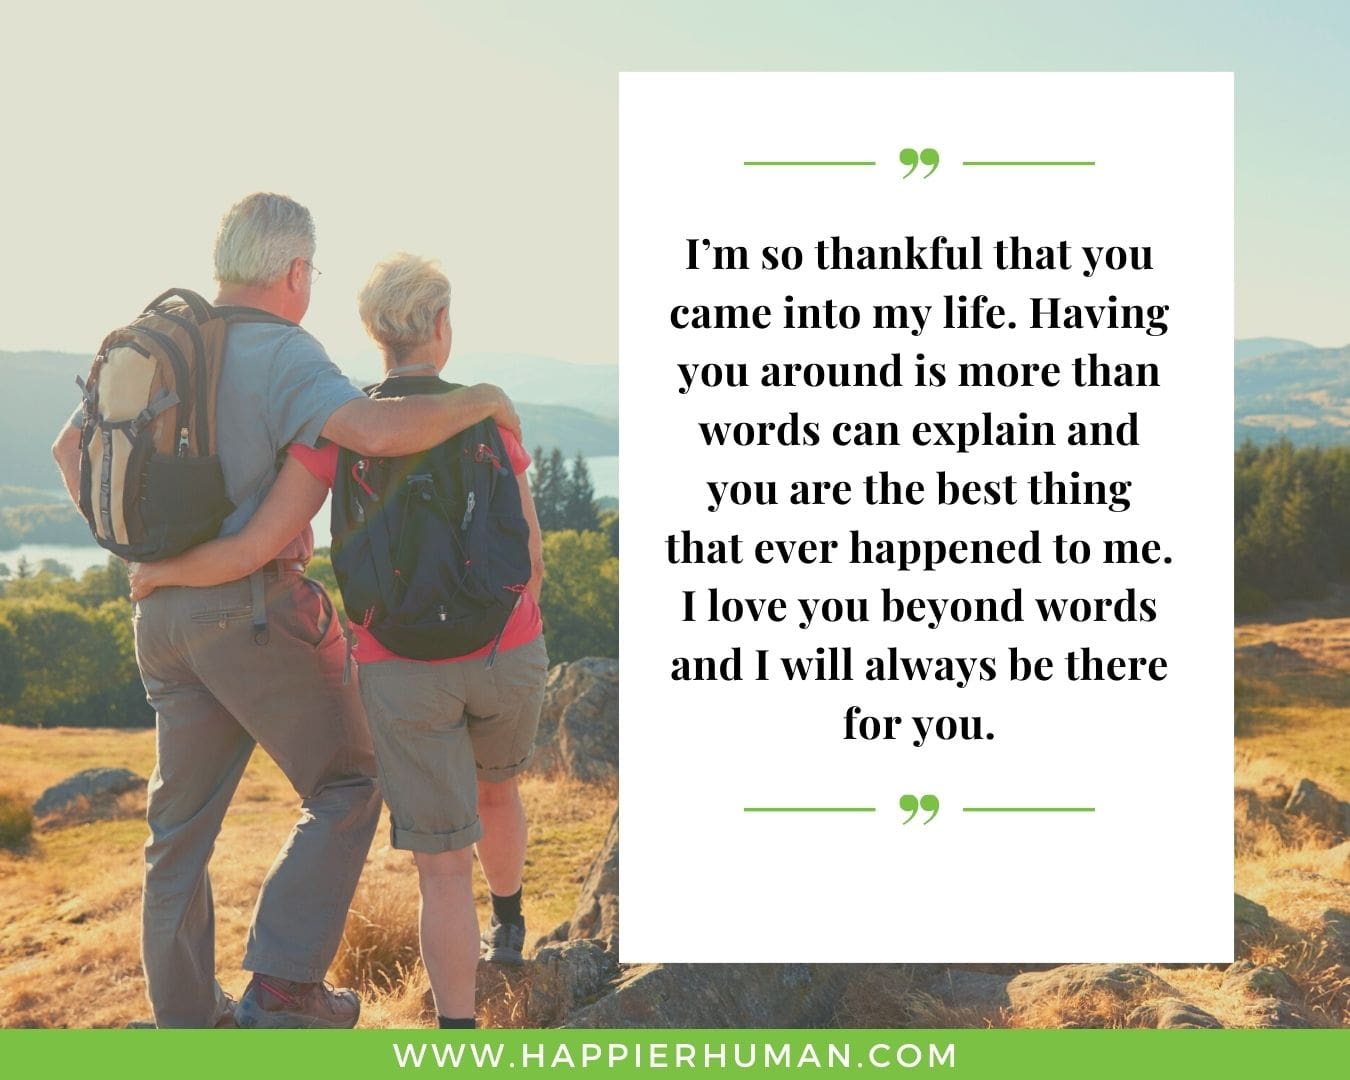 I’m Here for You Quotes - “I’m so thankful that you came into my life. Having you around is more than words can explain and you are the best thing that ever happened to me. I love you beyond words and I will always be there for you.”